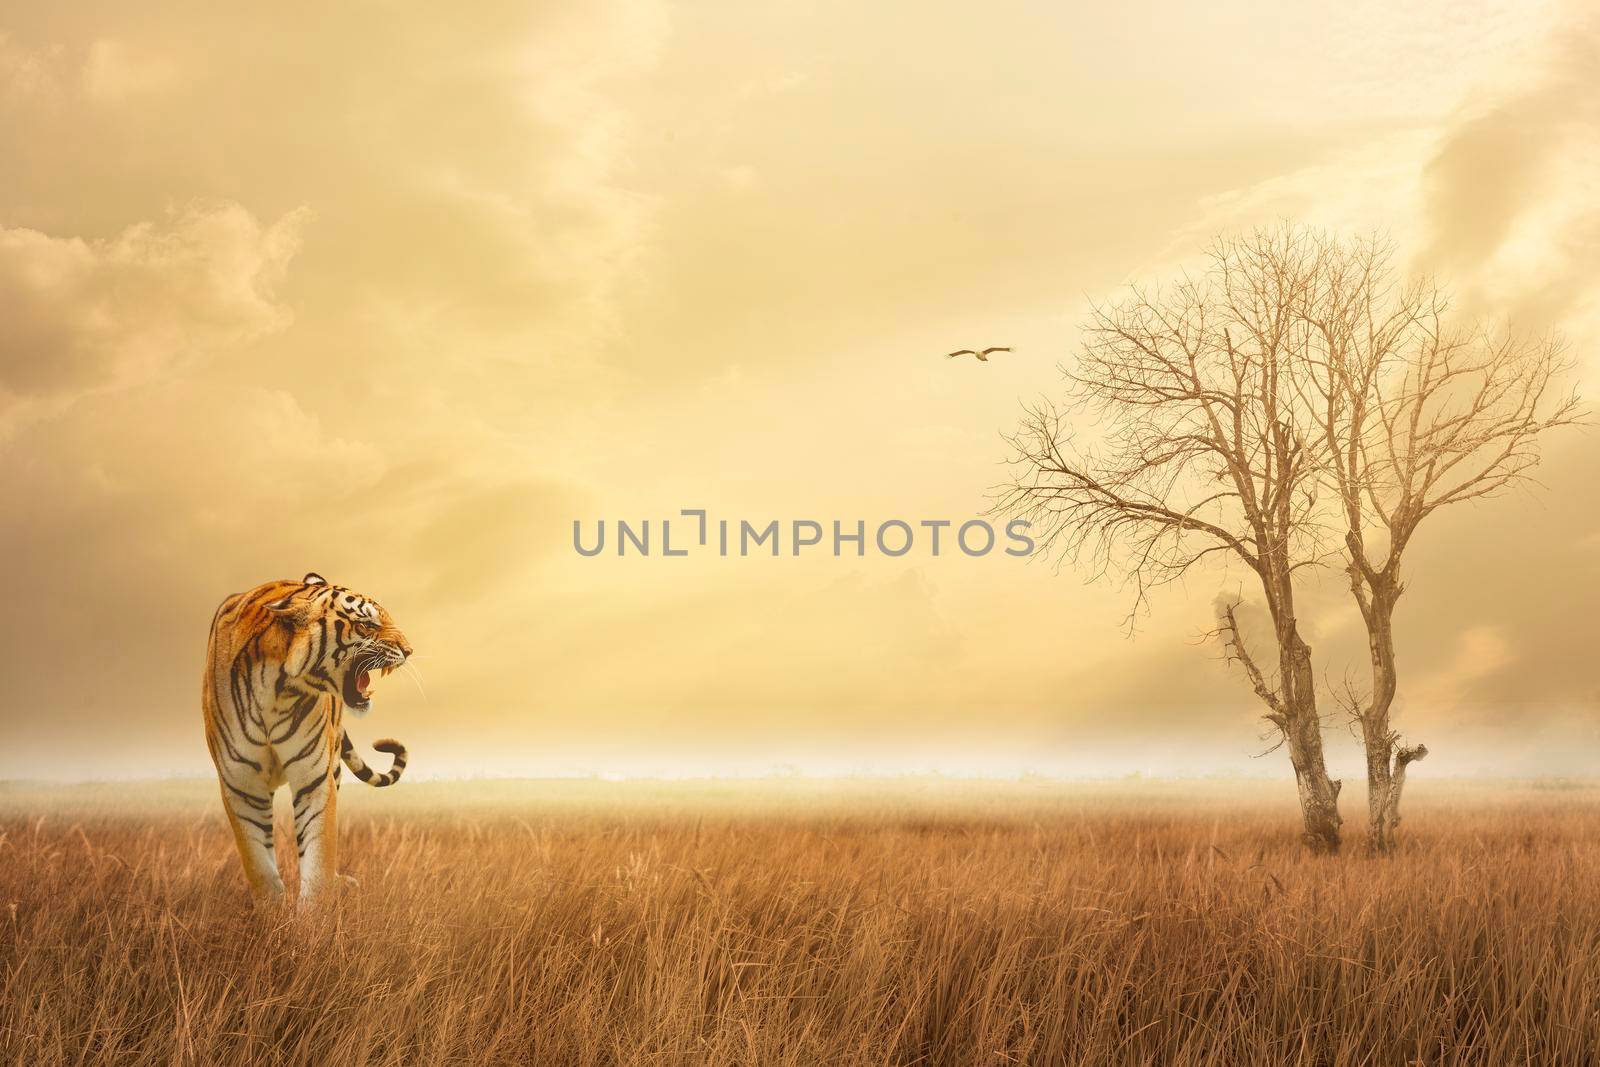 Great tiger male and an eagle in the nature habitat. Tiger walk during the golden light time. Wildlife scene with danger animal. by thanumporn